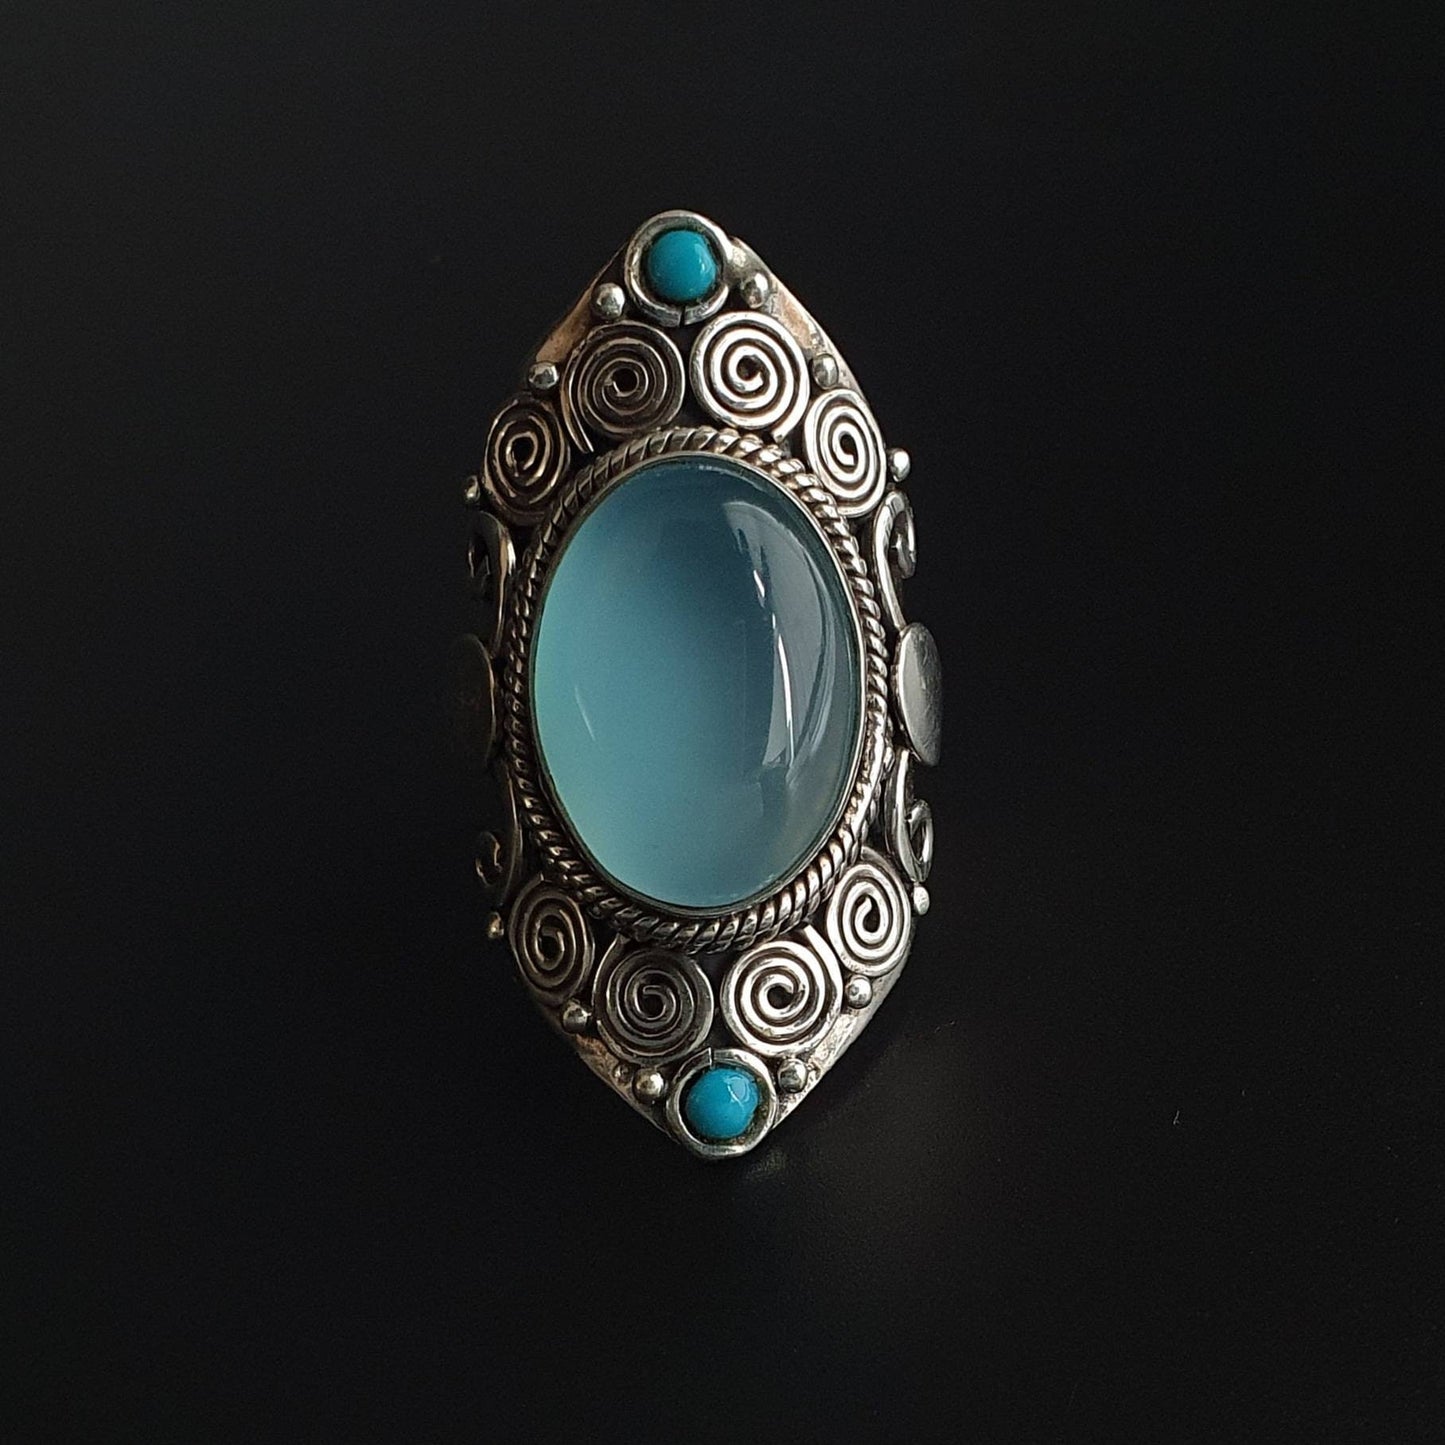 Silver ring, sterling, chalcedony,blue, filigree, authentic,rings, jewelry, gifts, vintage, handmade,luxury, fast shipping, exclusive,